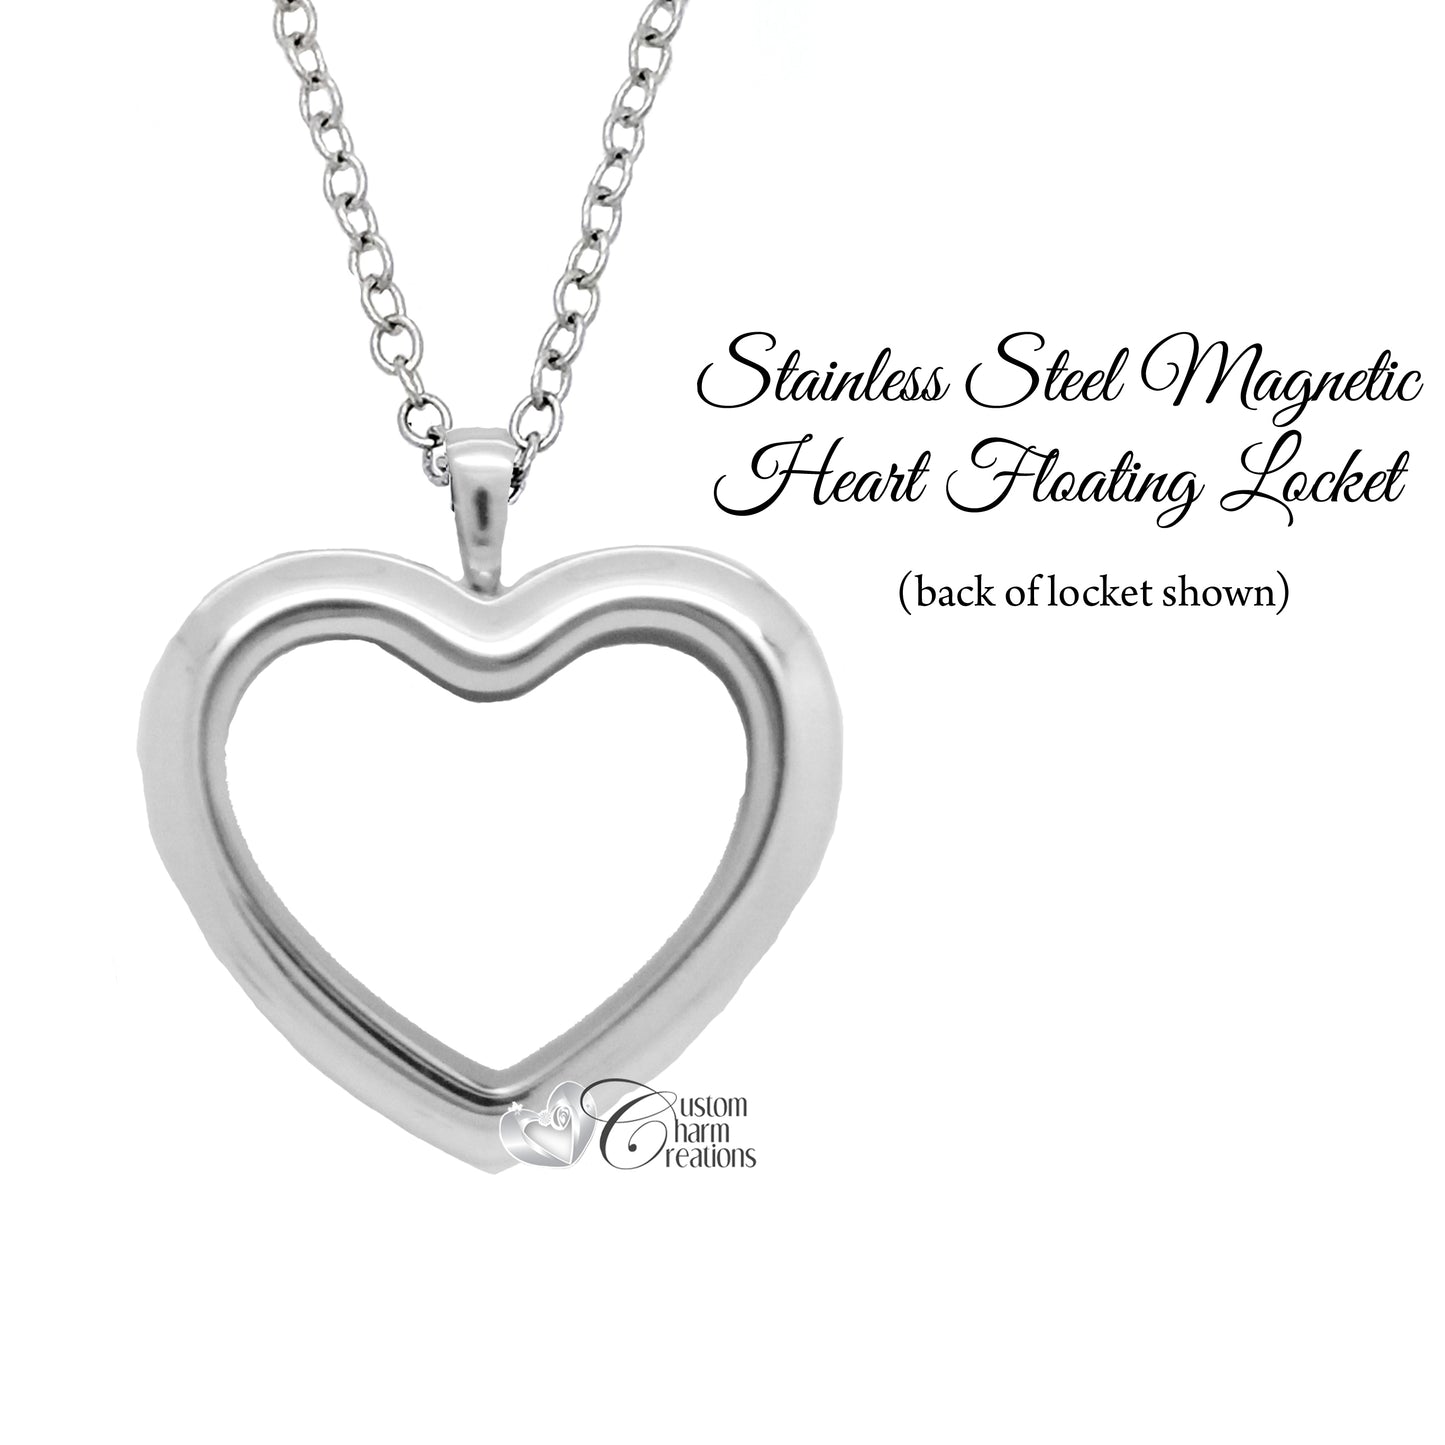 Stainless Steel Magnetic Heart Floating Locket with Crystals